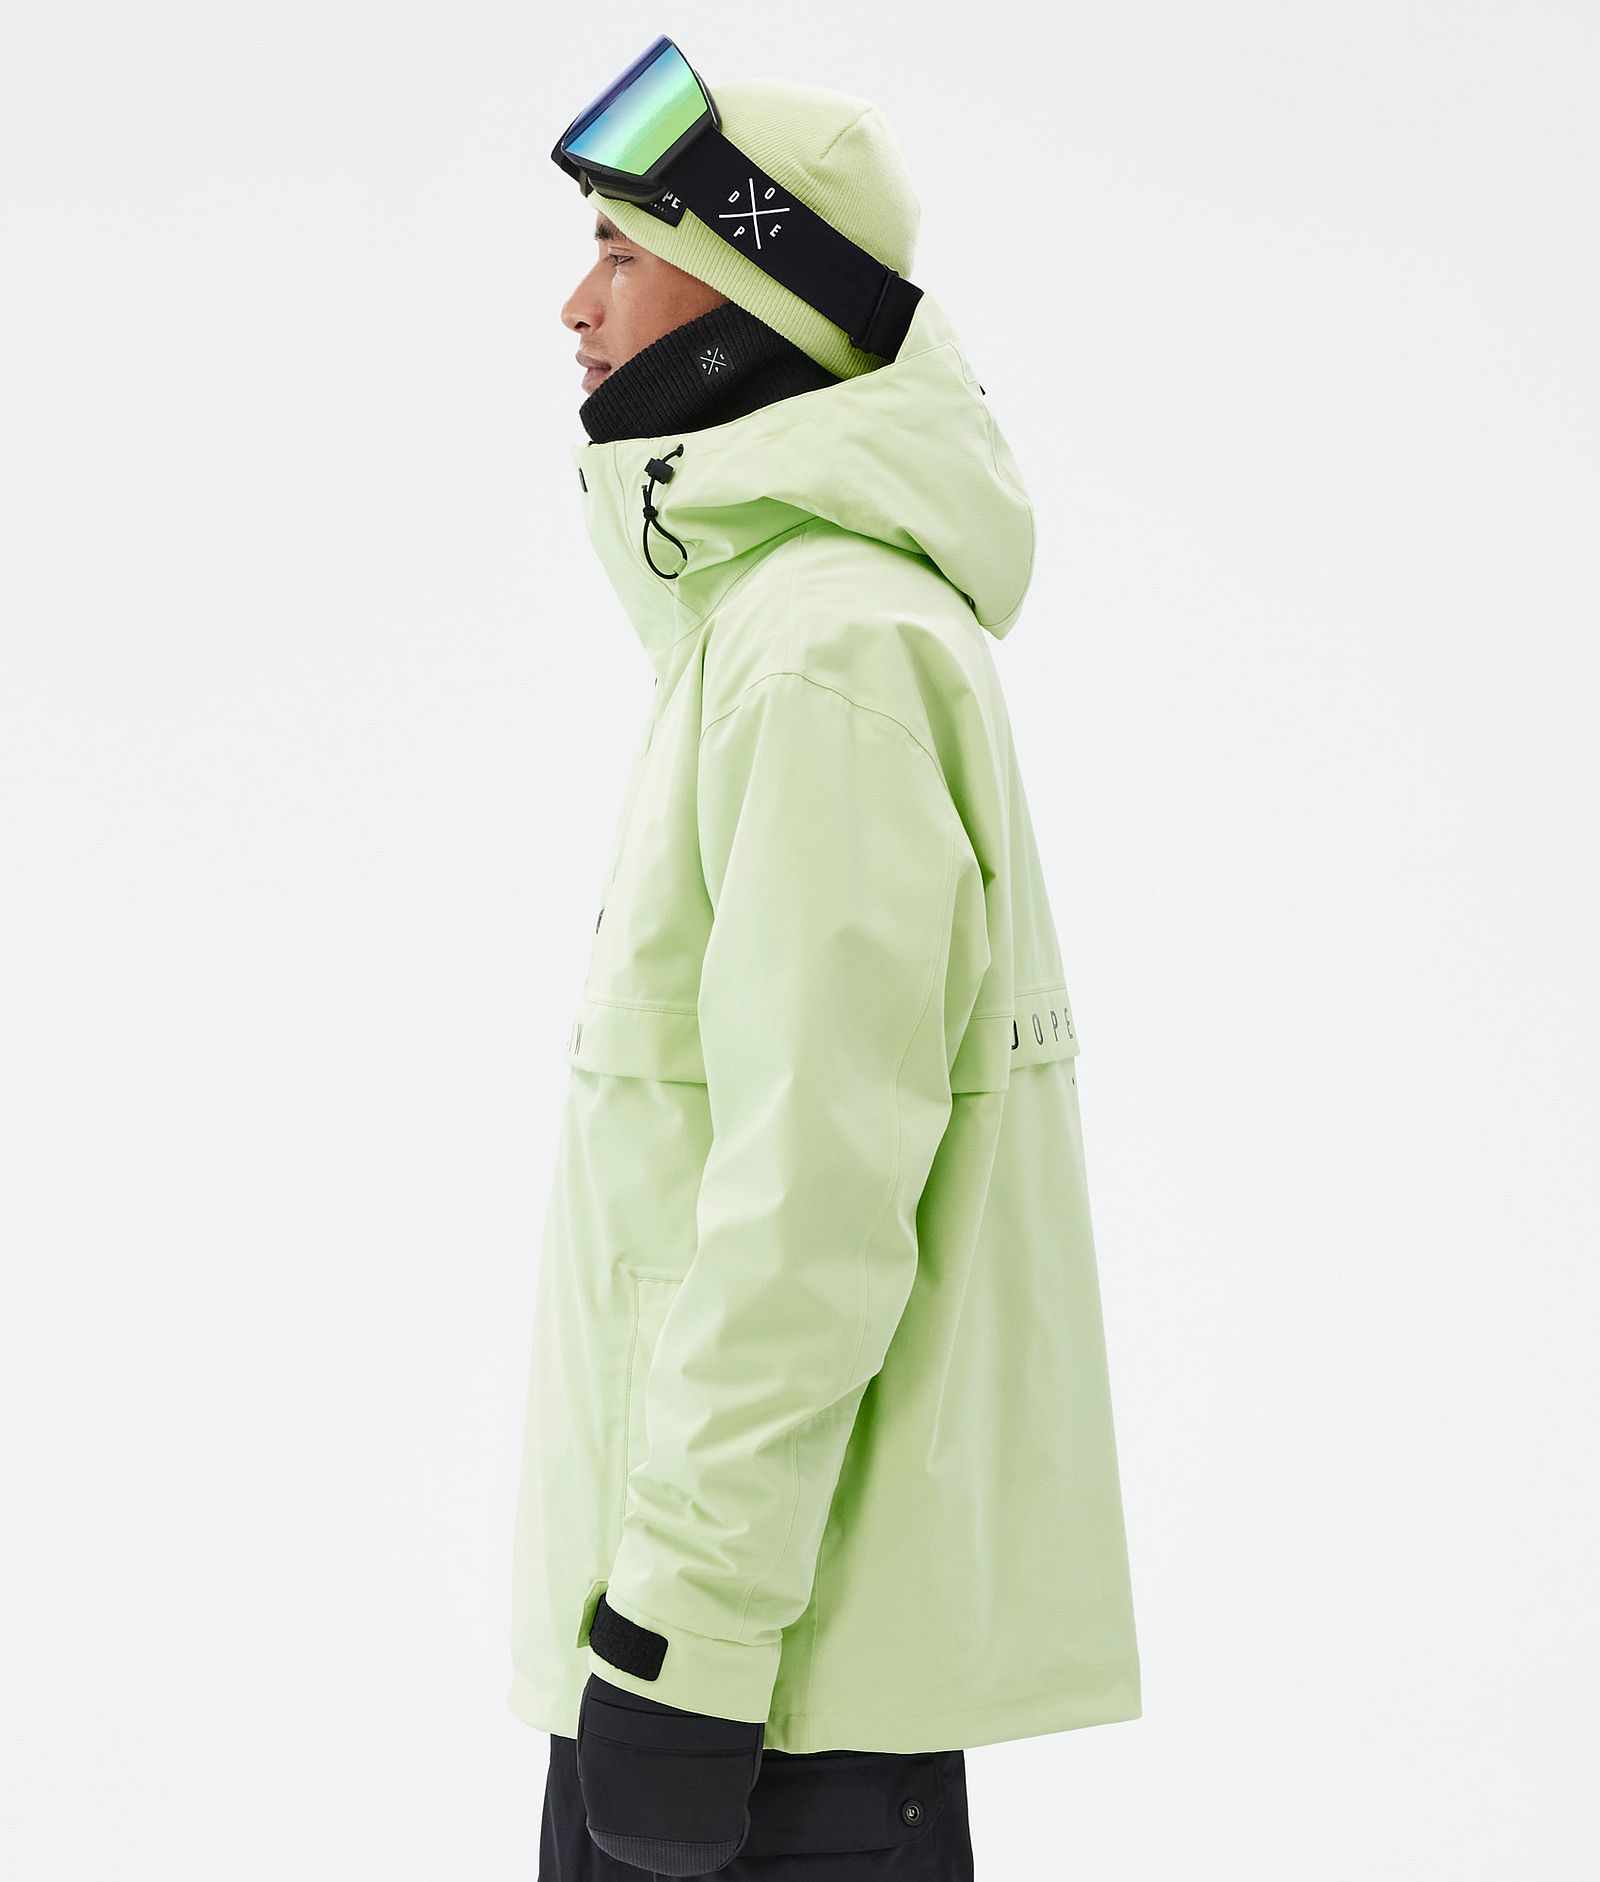 Legacy Snowboard Jacket Men Faded Neon, Image 5 of 8